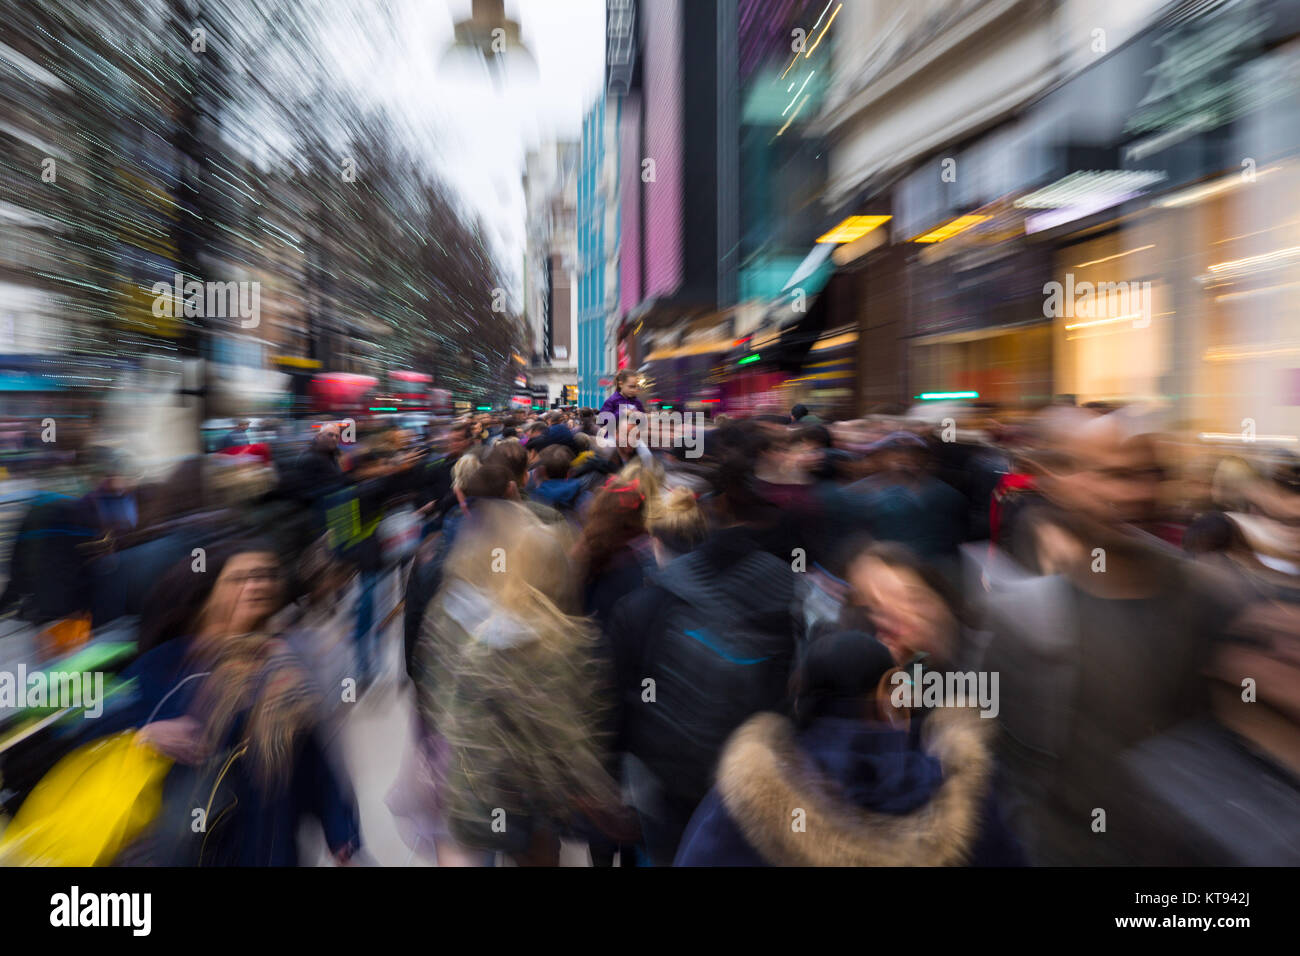 London, UK. 23rd Dec, 2017. Shoppers crowd London's Oxford Street on the second last shopping days before Christmas, with many shops now offering up to 70% off as they push to make their sales projections. Credit: Paul Davey/Alamy Live News Stock Photo